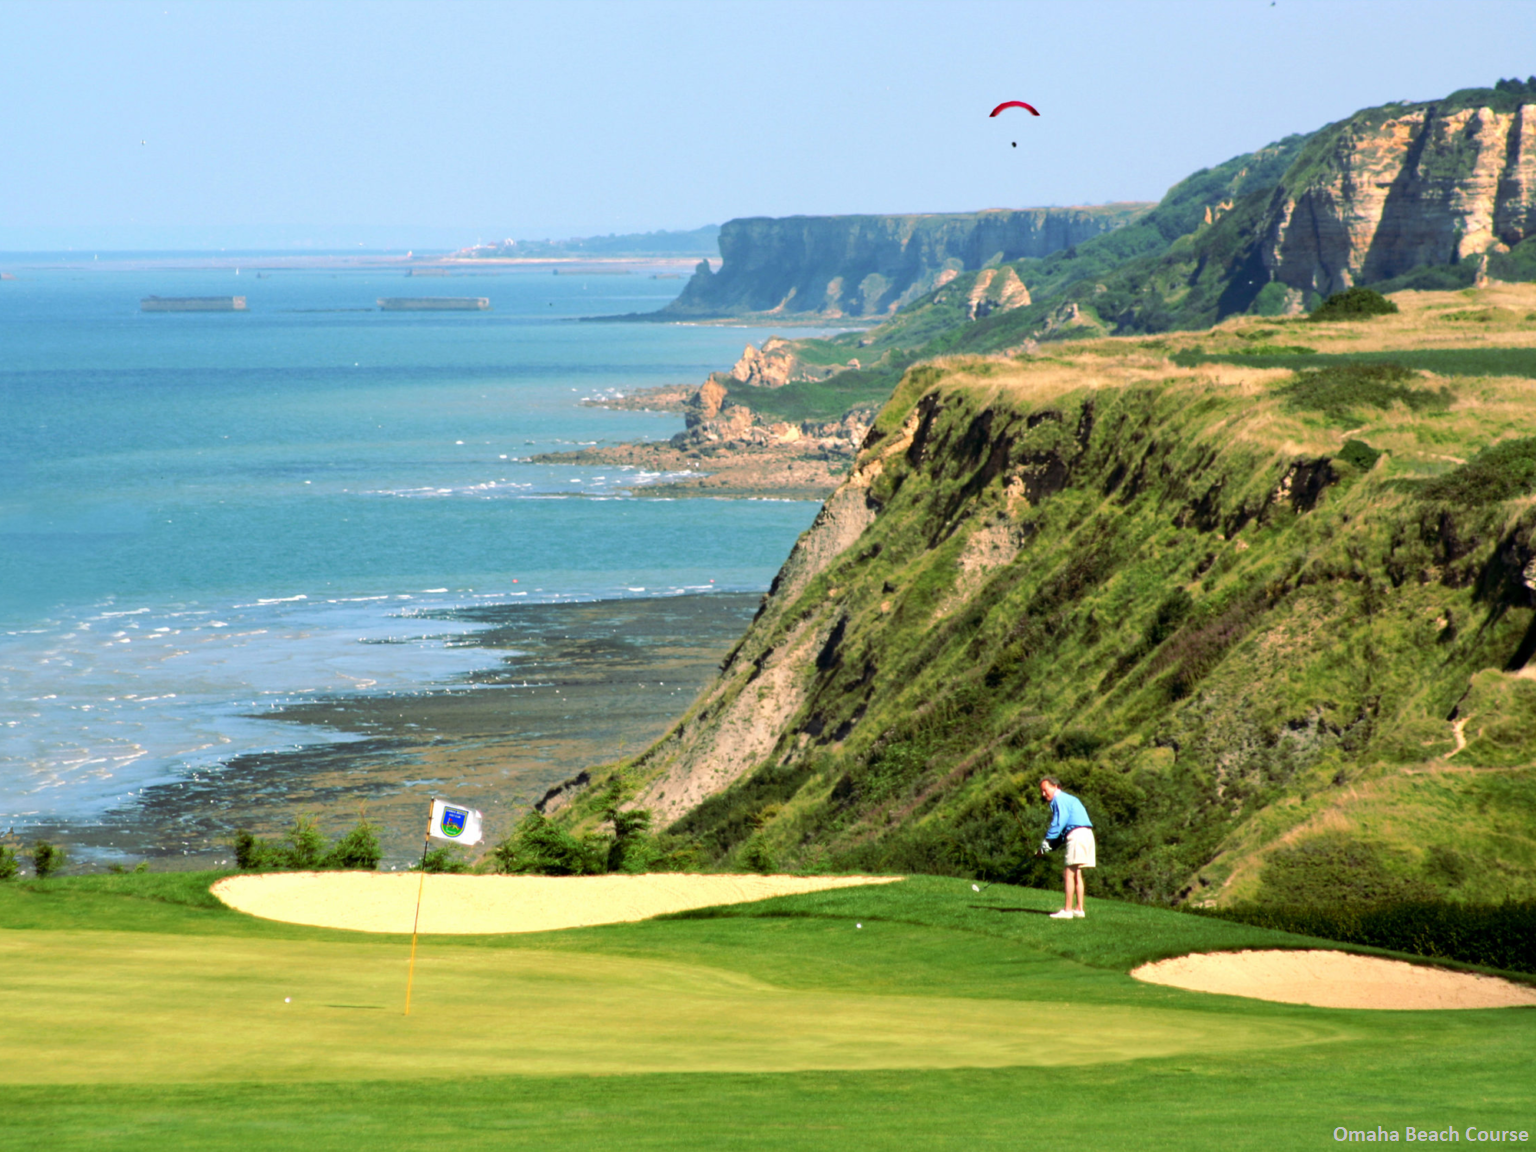 LE GOLF NATIONAL - Golf Sightseeing Tours - Private Golf tours in France,  Normandy, Brittany and Loire Valley